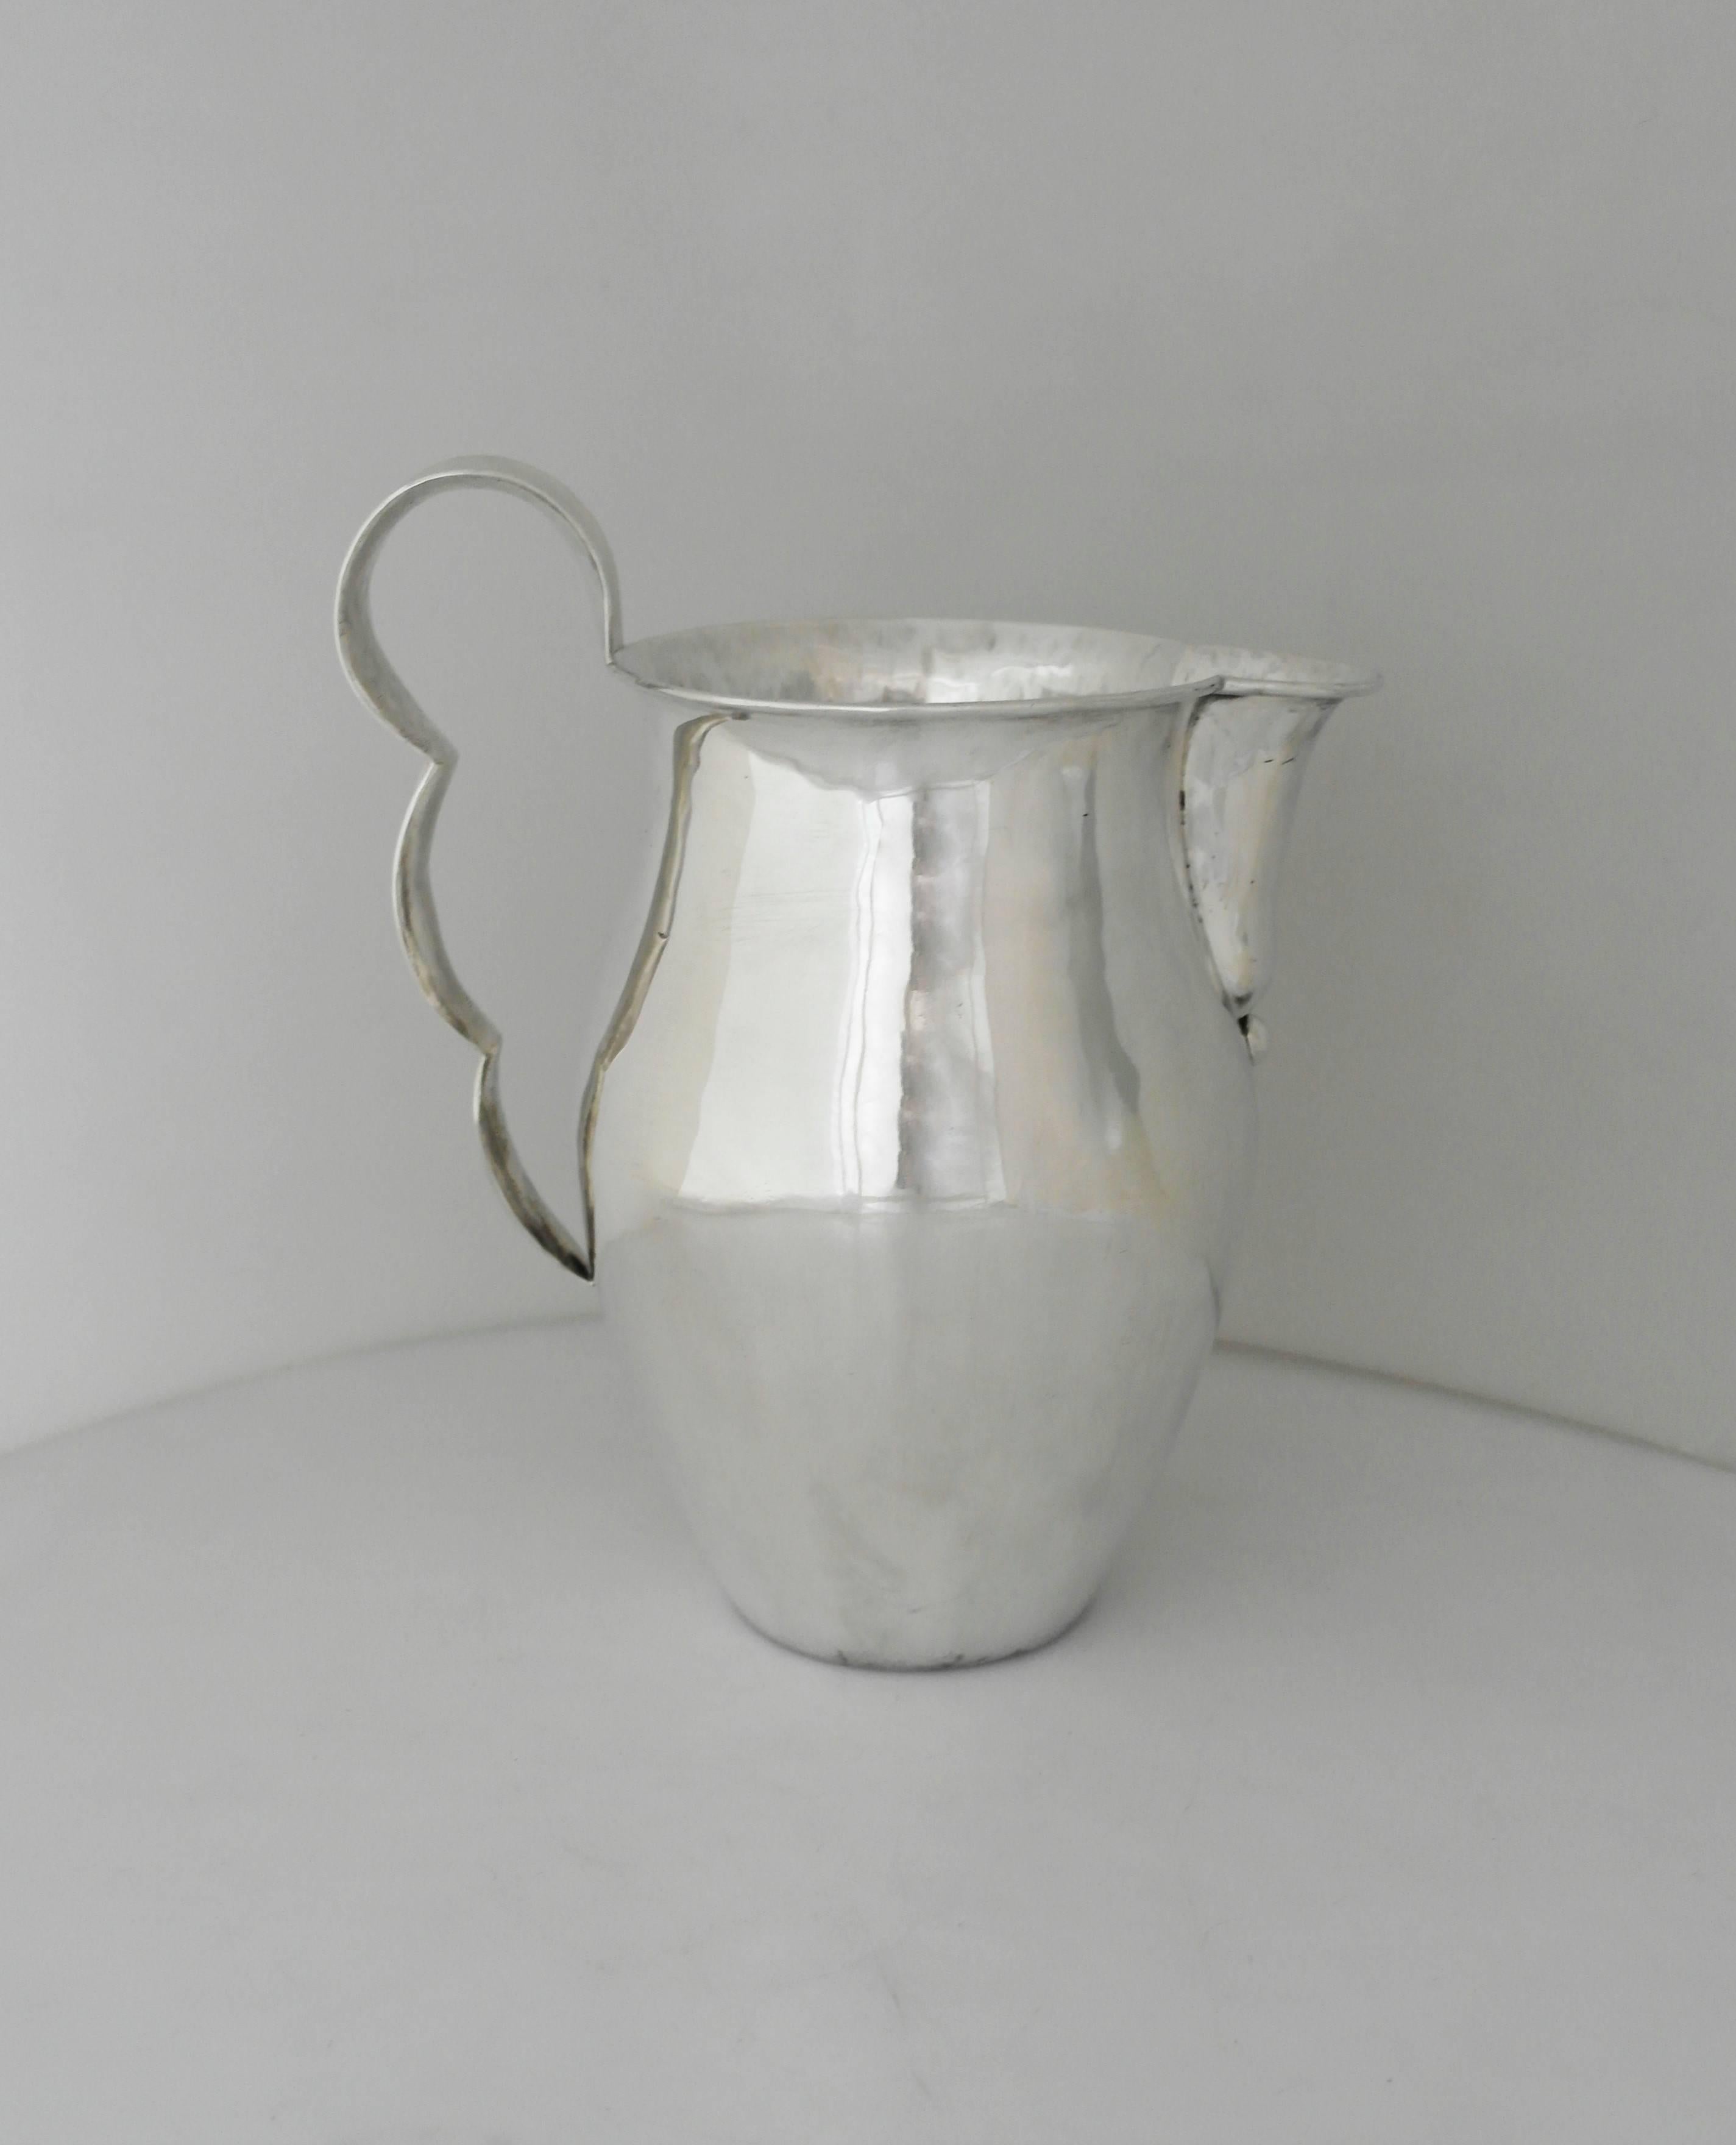 Being offered is a sterling silver pitcher by William Spratling of Taxco, Mexico. Entirely hand-wrought object made during his first design period (1931-1946). Bulbous form with a rolled rim and shaped lip; curved strap handle. Dimensions: 10 inches